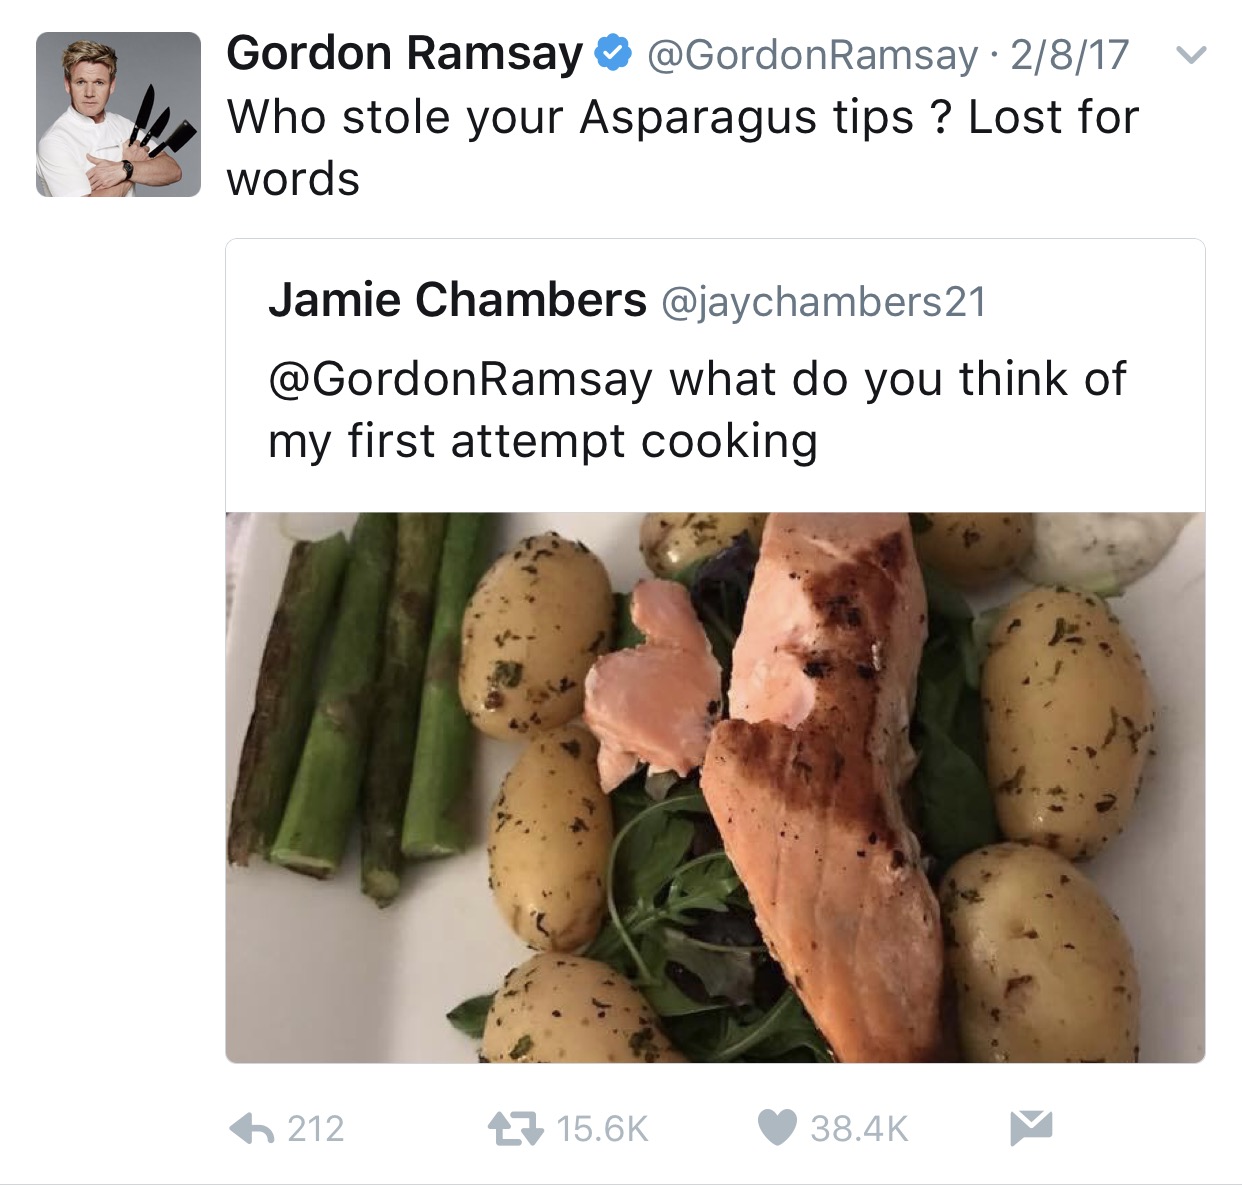 tweet - gordon ramsay twitter memes - V Gordon Ramsay Ramsay 2817 Who stole your Asparagus tips ? Lost for words Jamie Chambers 21 Ramsay what do you think of my first attempt cooking 212 27